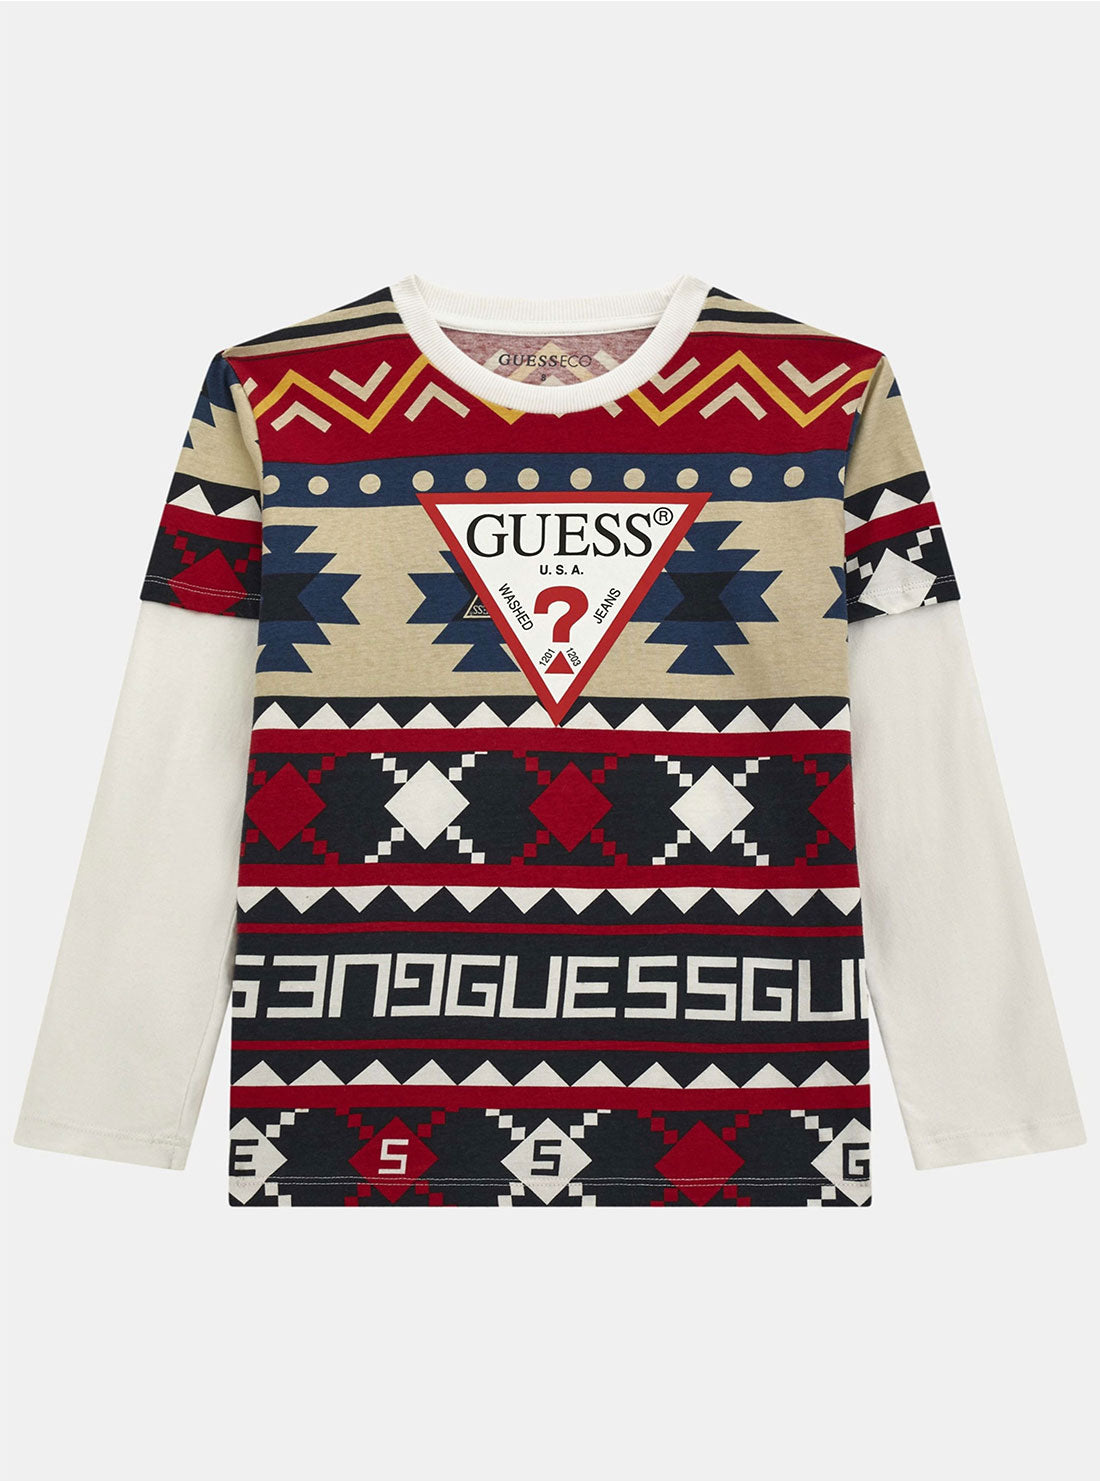 GUESS White Multi Print Long Sleeve T-Shirt (7-16) front view